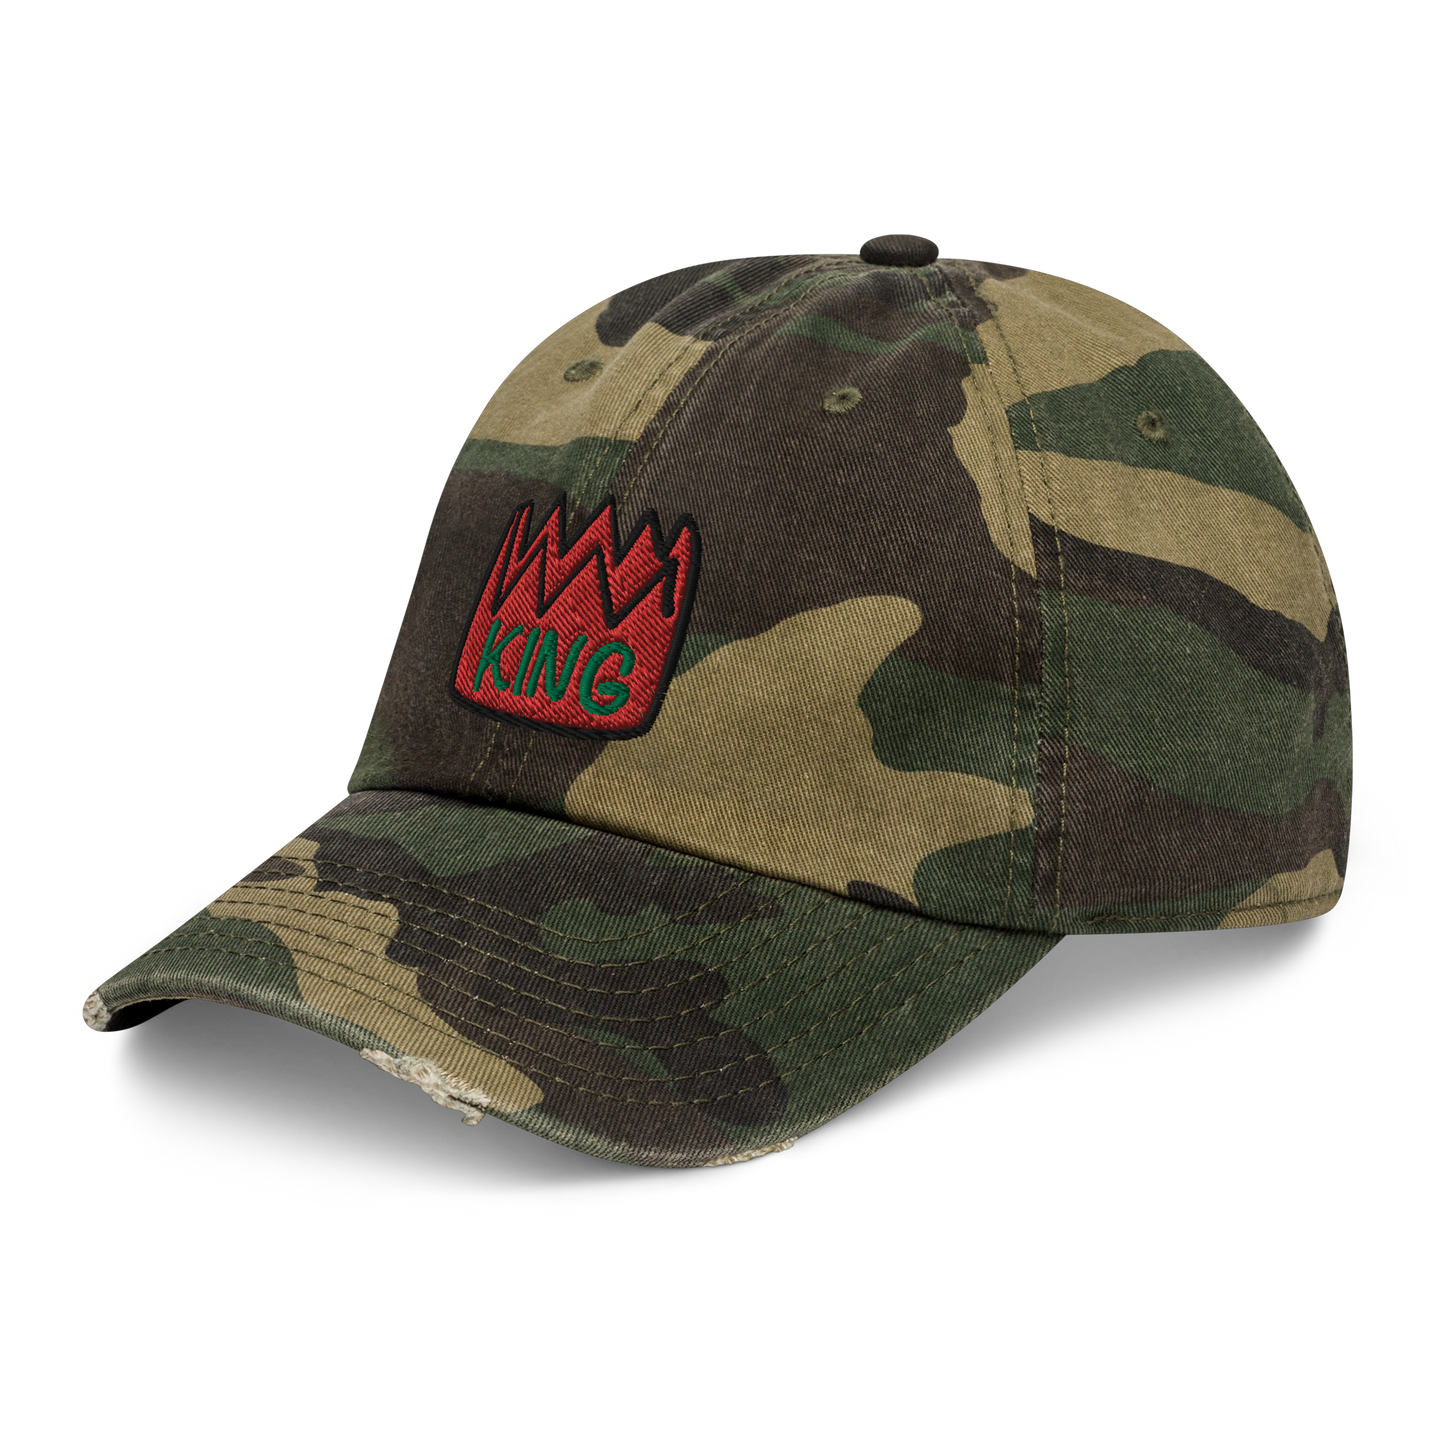 King Distressed Camo Hat